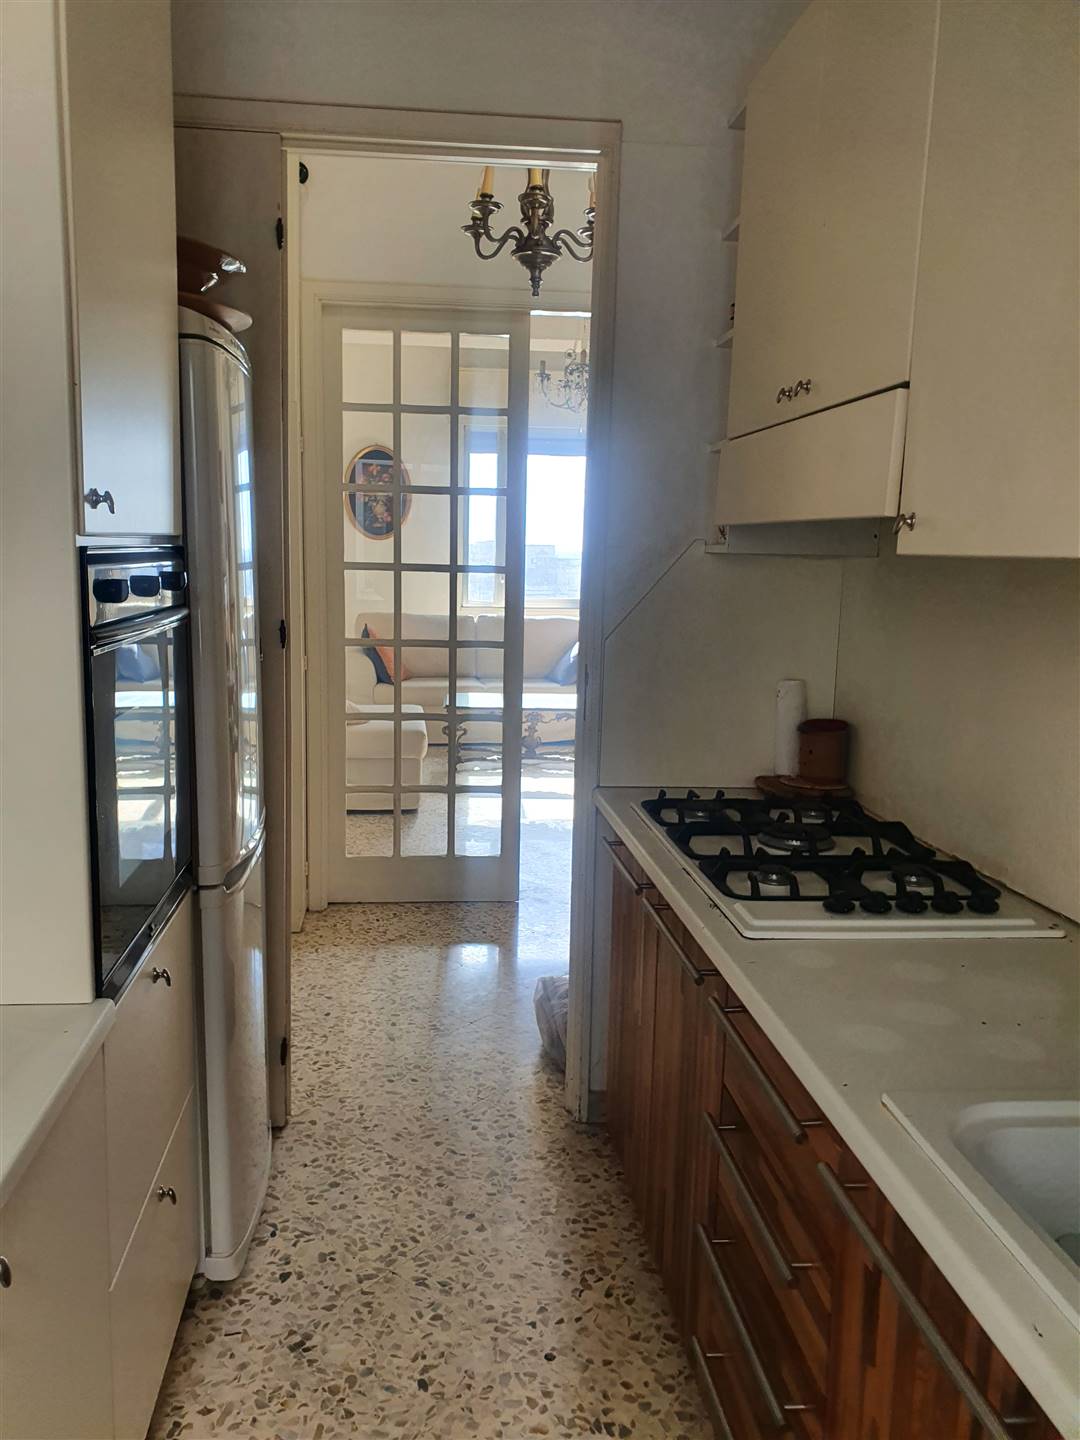 CENTRO STORICO, GALATINA, Apartment for sale of 90 Sq. mt., Habitable, Heating Individual heating system, placed at 5° on 5, composed by: 3 Rooms, , 